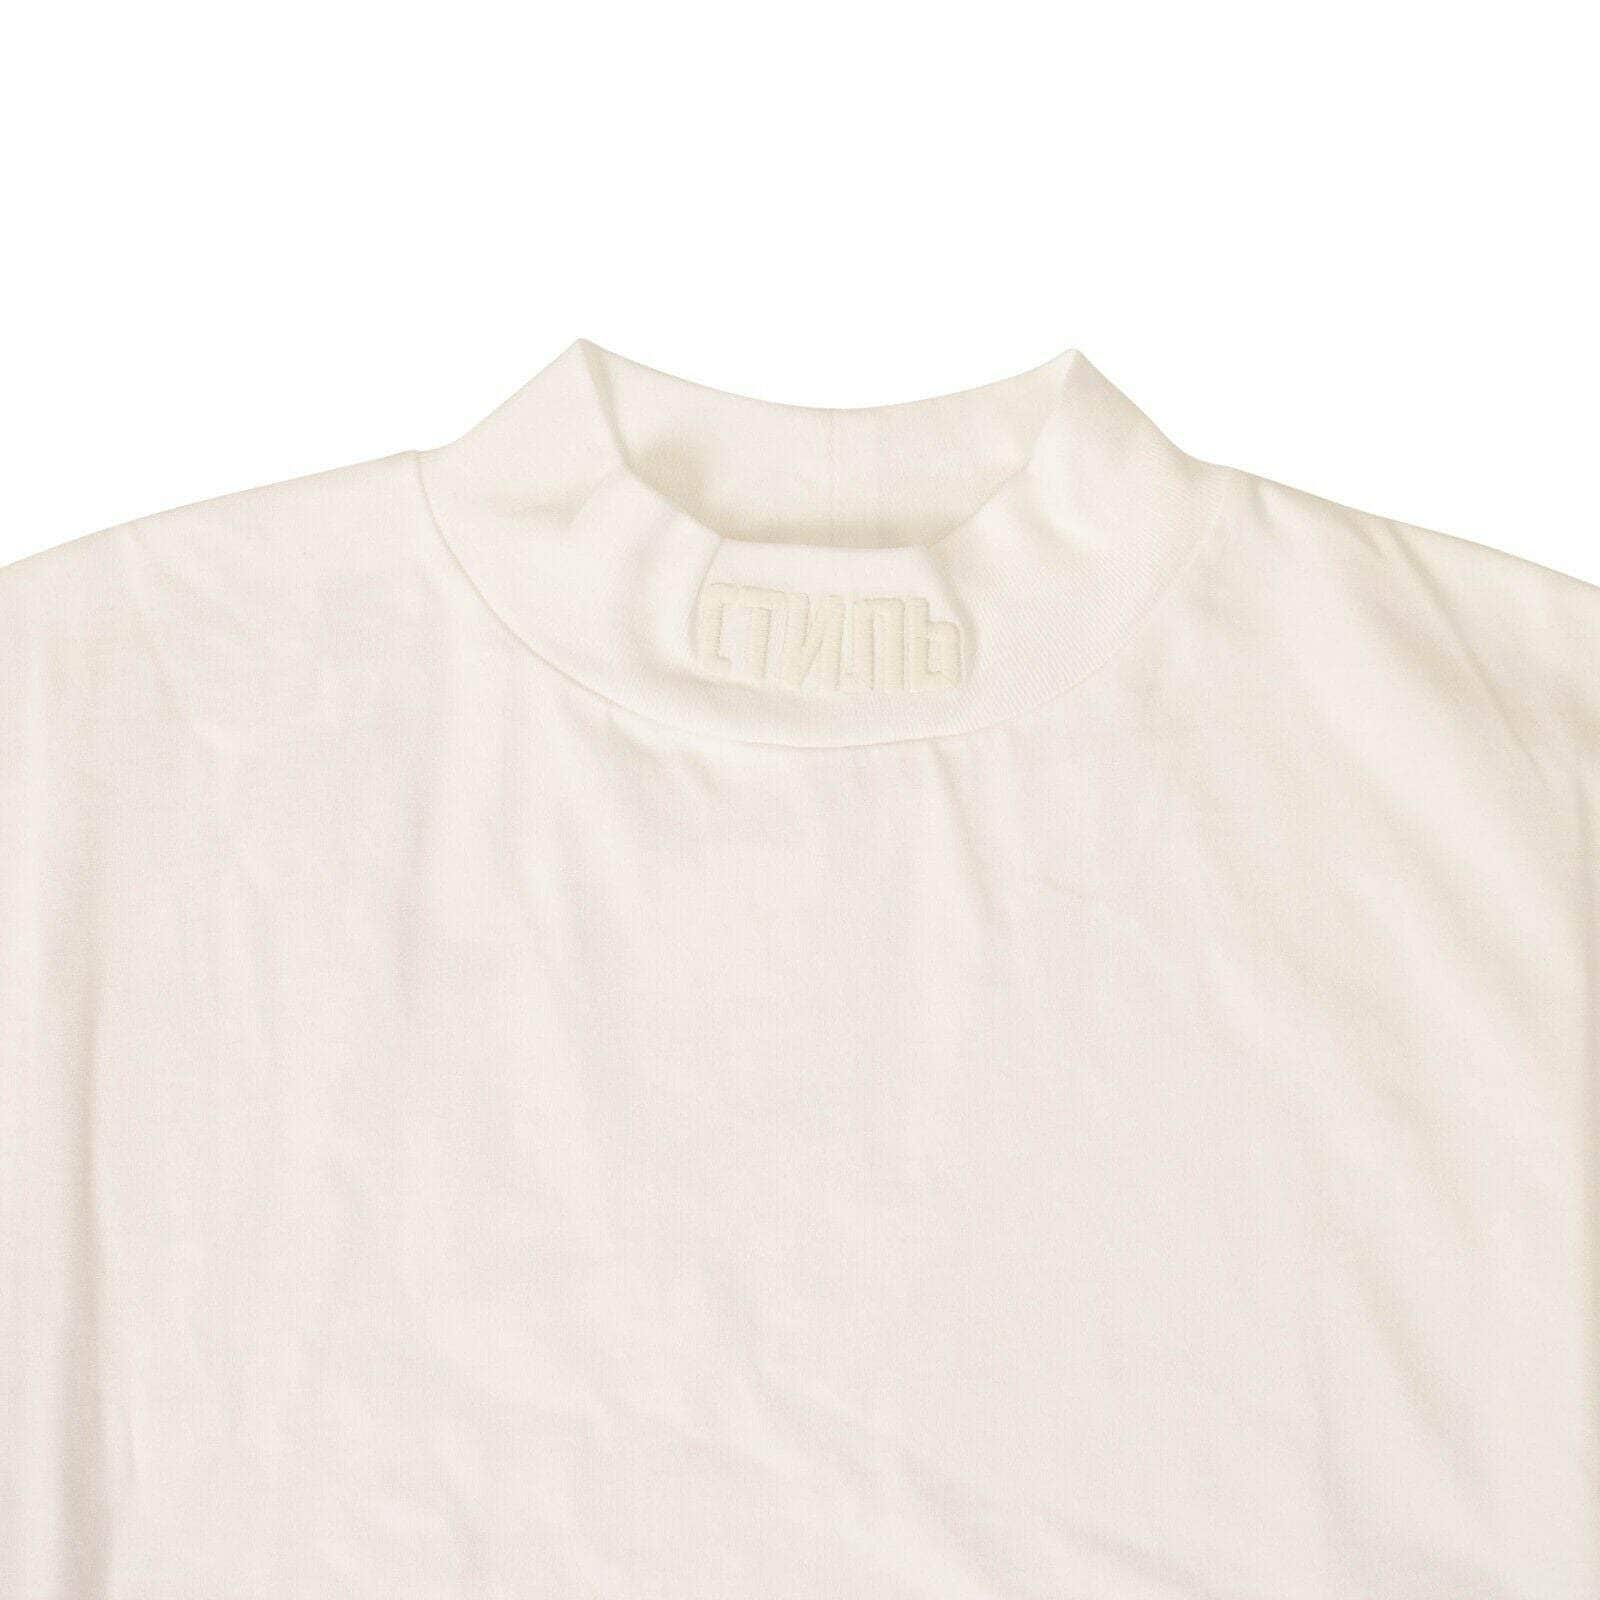 Heron Preston channelenable-all, chicmi, couponcollection, gender-mens, heron-preston, main-clothing, size-m, size-s, size-xl, size-xs, under-250 White Logo Turtleneck Long Sleeve T-Shirt